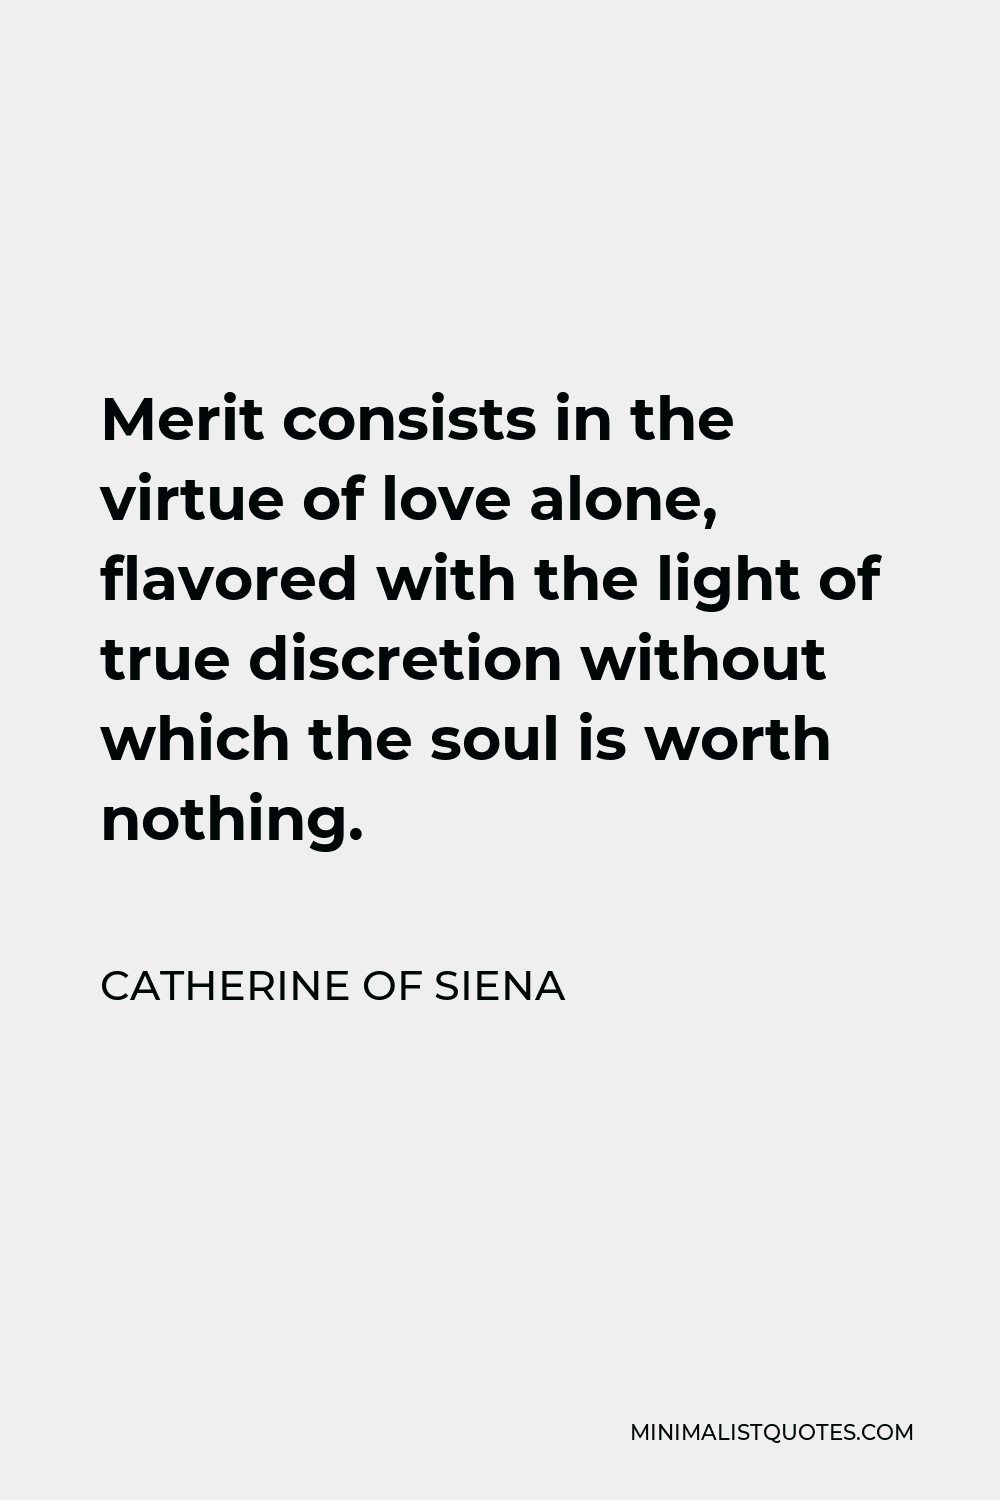 Catherine of Siena Quote - Merit consists in the virtue of love alone, flavored with the light of true discretion without which the soul is worth nothing.